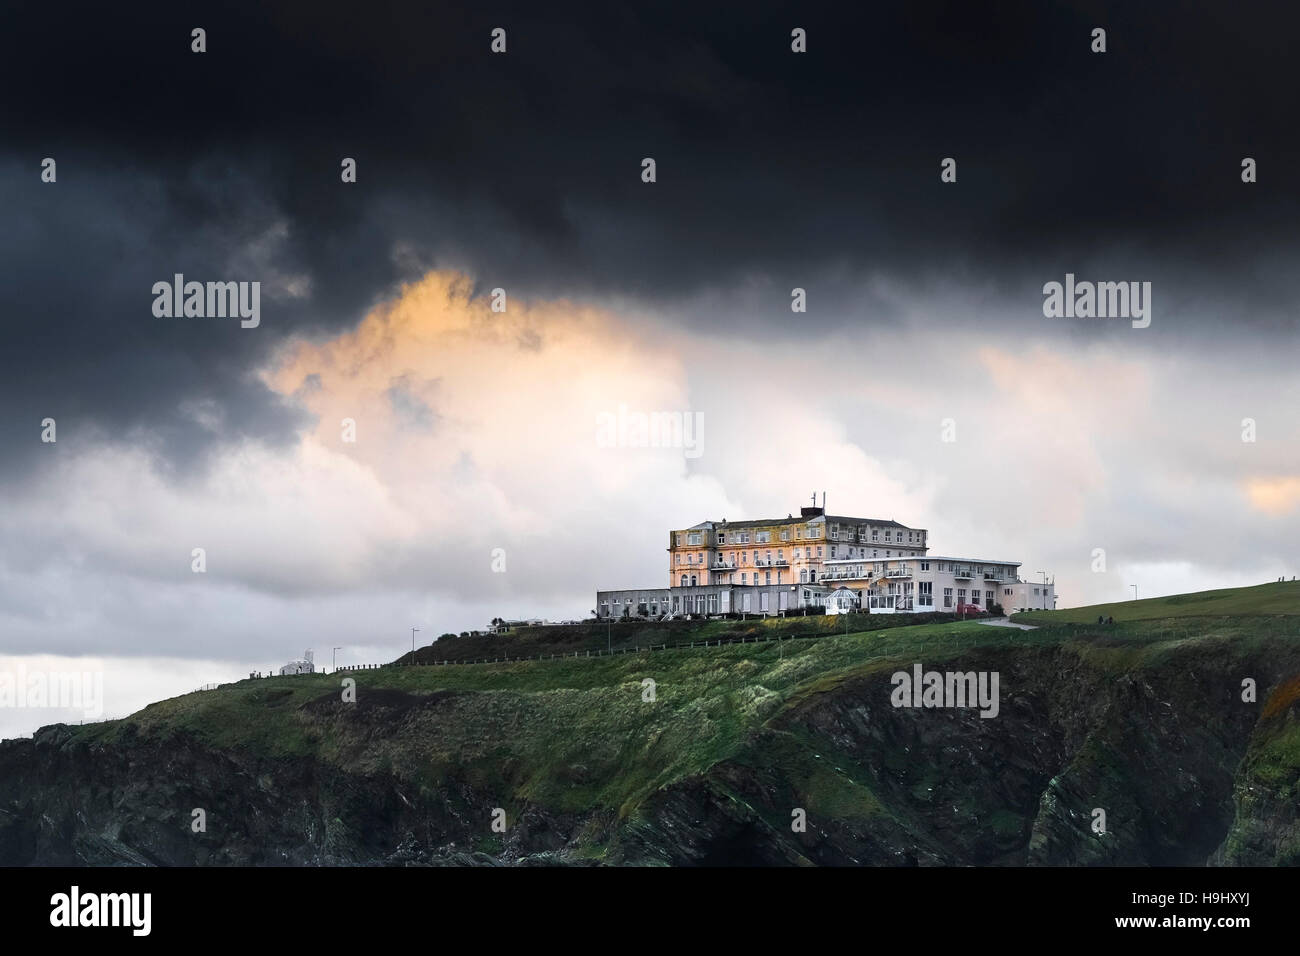 Dark clouds from a storm gathering over The Atlantic Hotel in Newquay, Cornwall. UK weather. Stock Photo